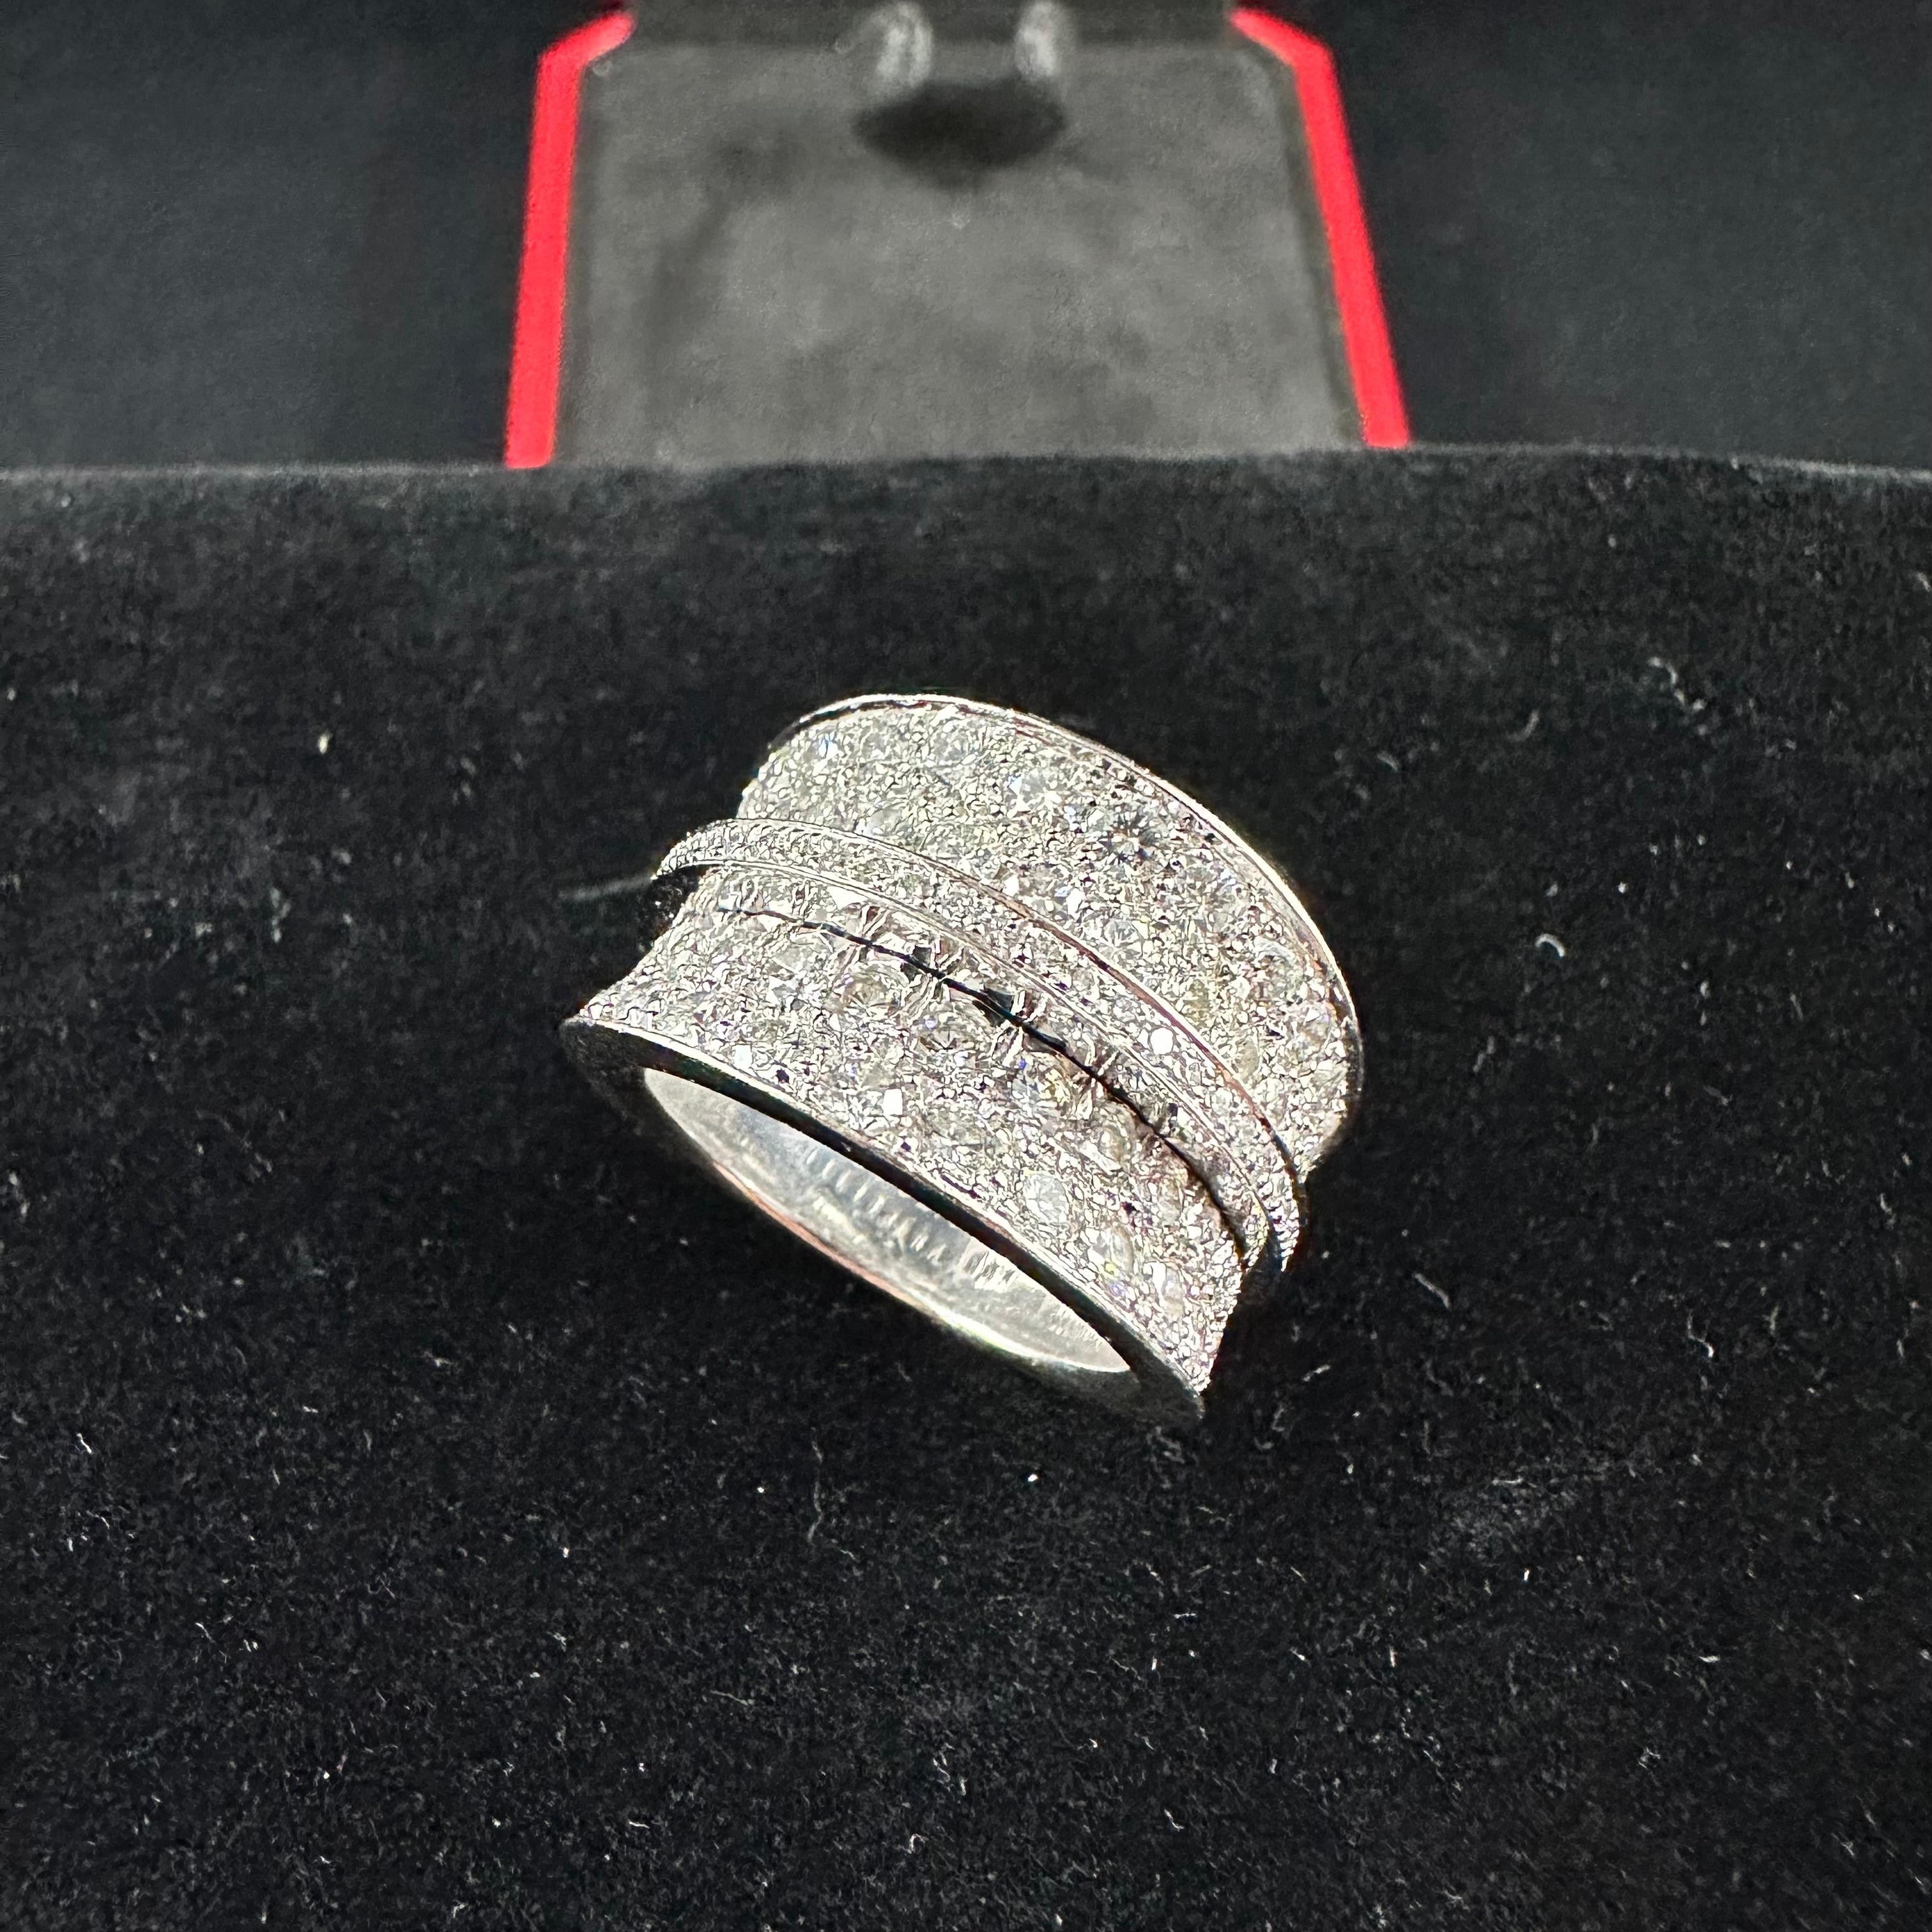 Wide Cartier Diamond Band
105 Diamonds total Weight 3.50 cts 
14 mm Width 
Size 54 or 6.5 US
Substantial Weight 22g of 18K White Gold Beautiful Pave Set Round Diamond.

Cartier ring, 18K white gold (750/1000), set with 104 brilliant Cut Round